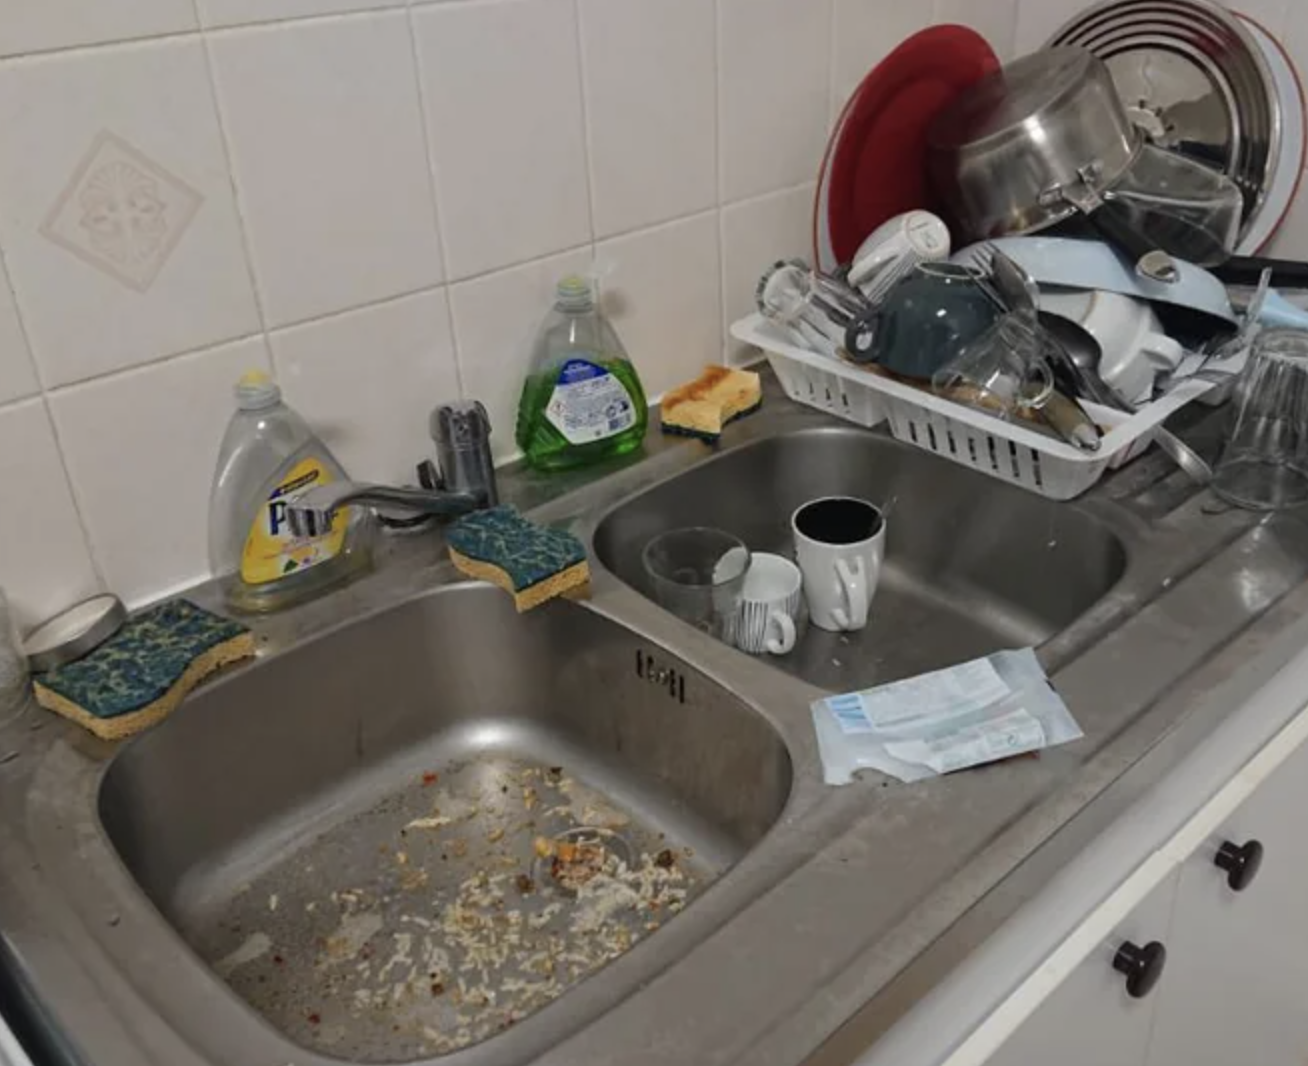 The sink is full of food, while the dishes are stacked on the counter with no rhyme or reason